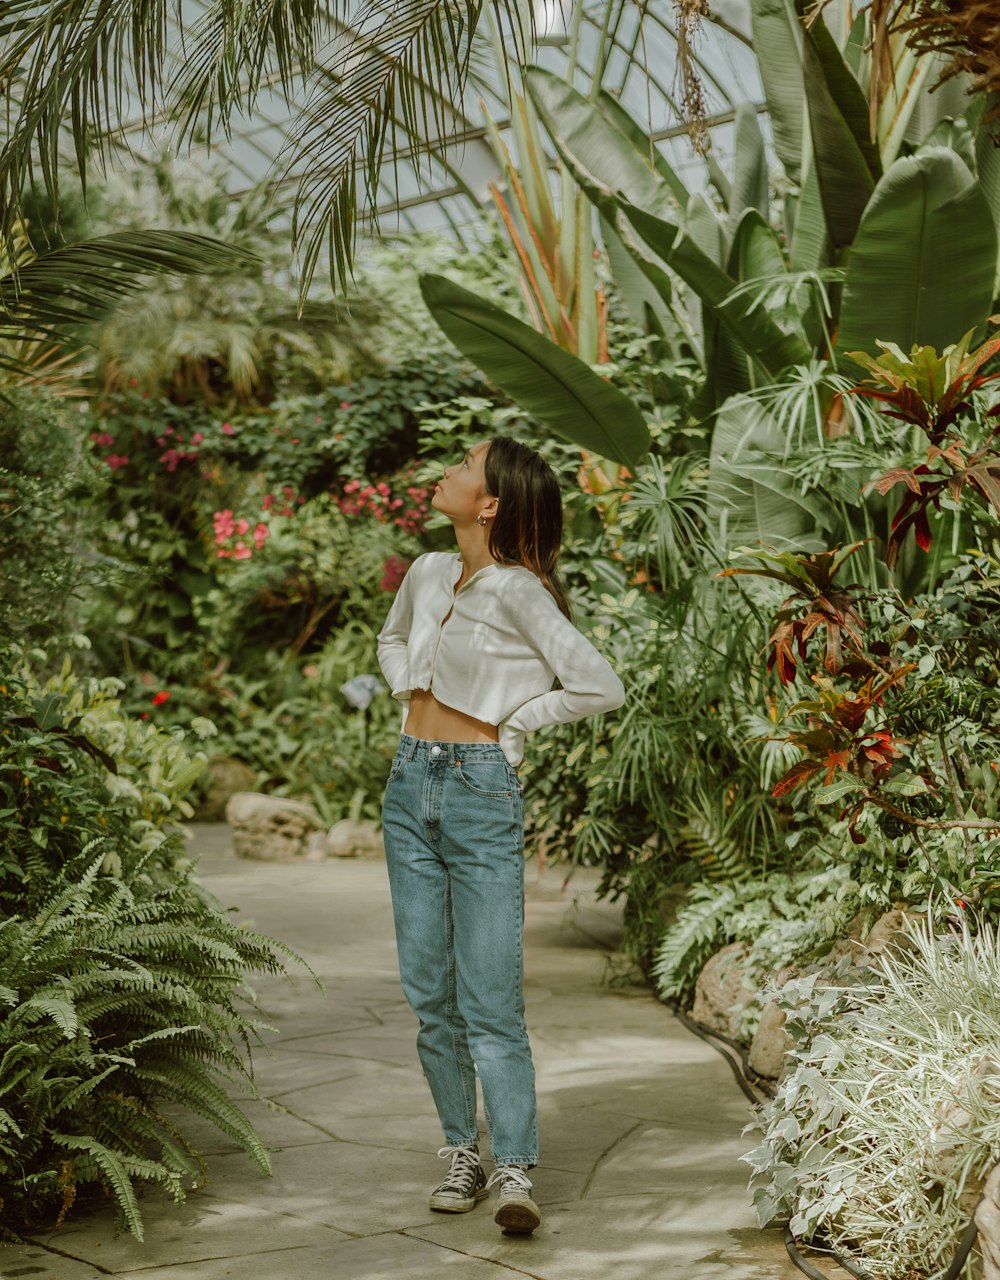 Woman in white shirt and blue denim jeans standing near green plants during  daytime photo – Free Toronto Image on Unsplash